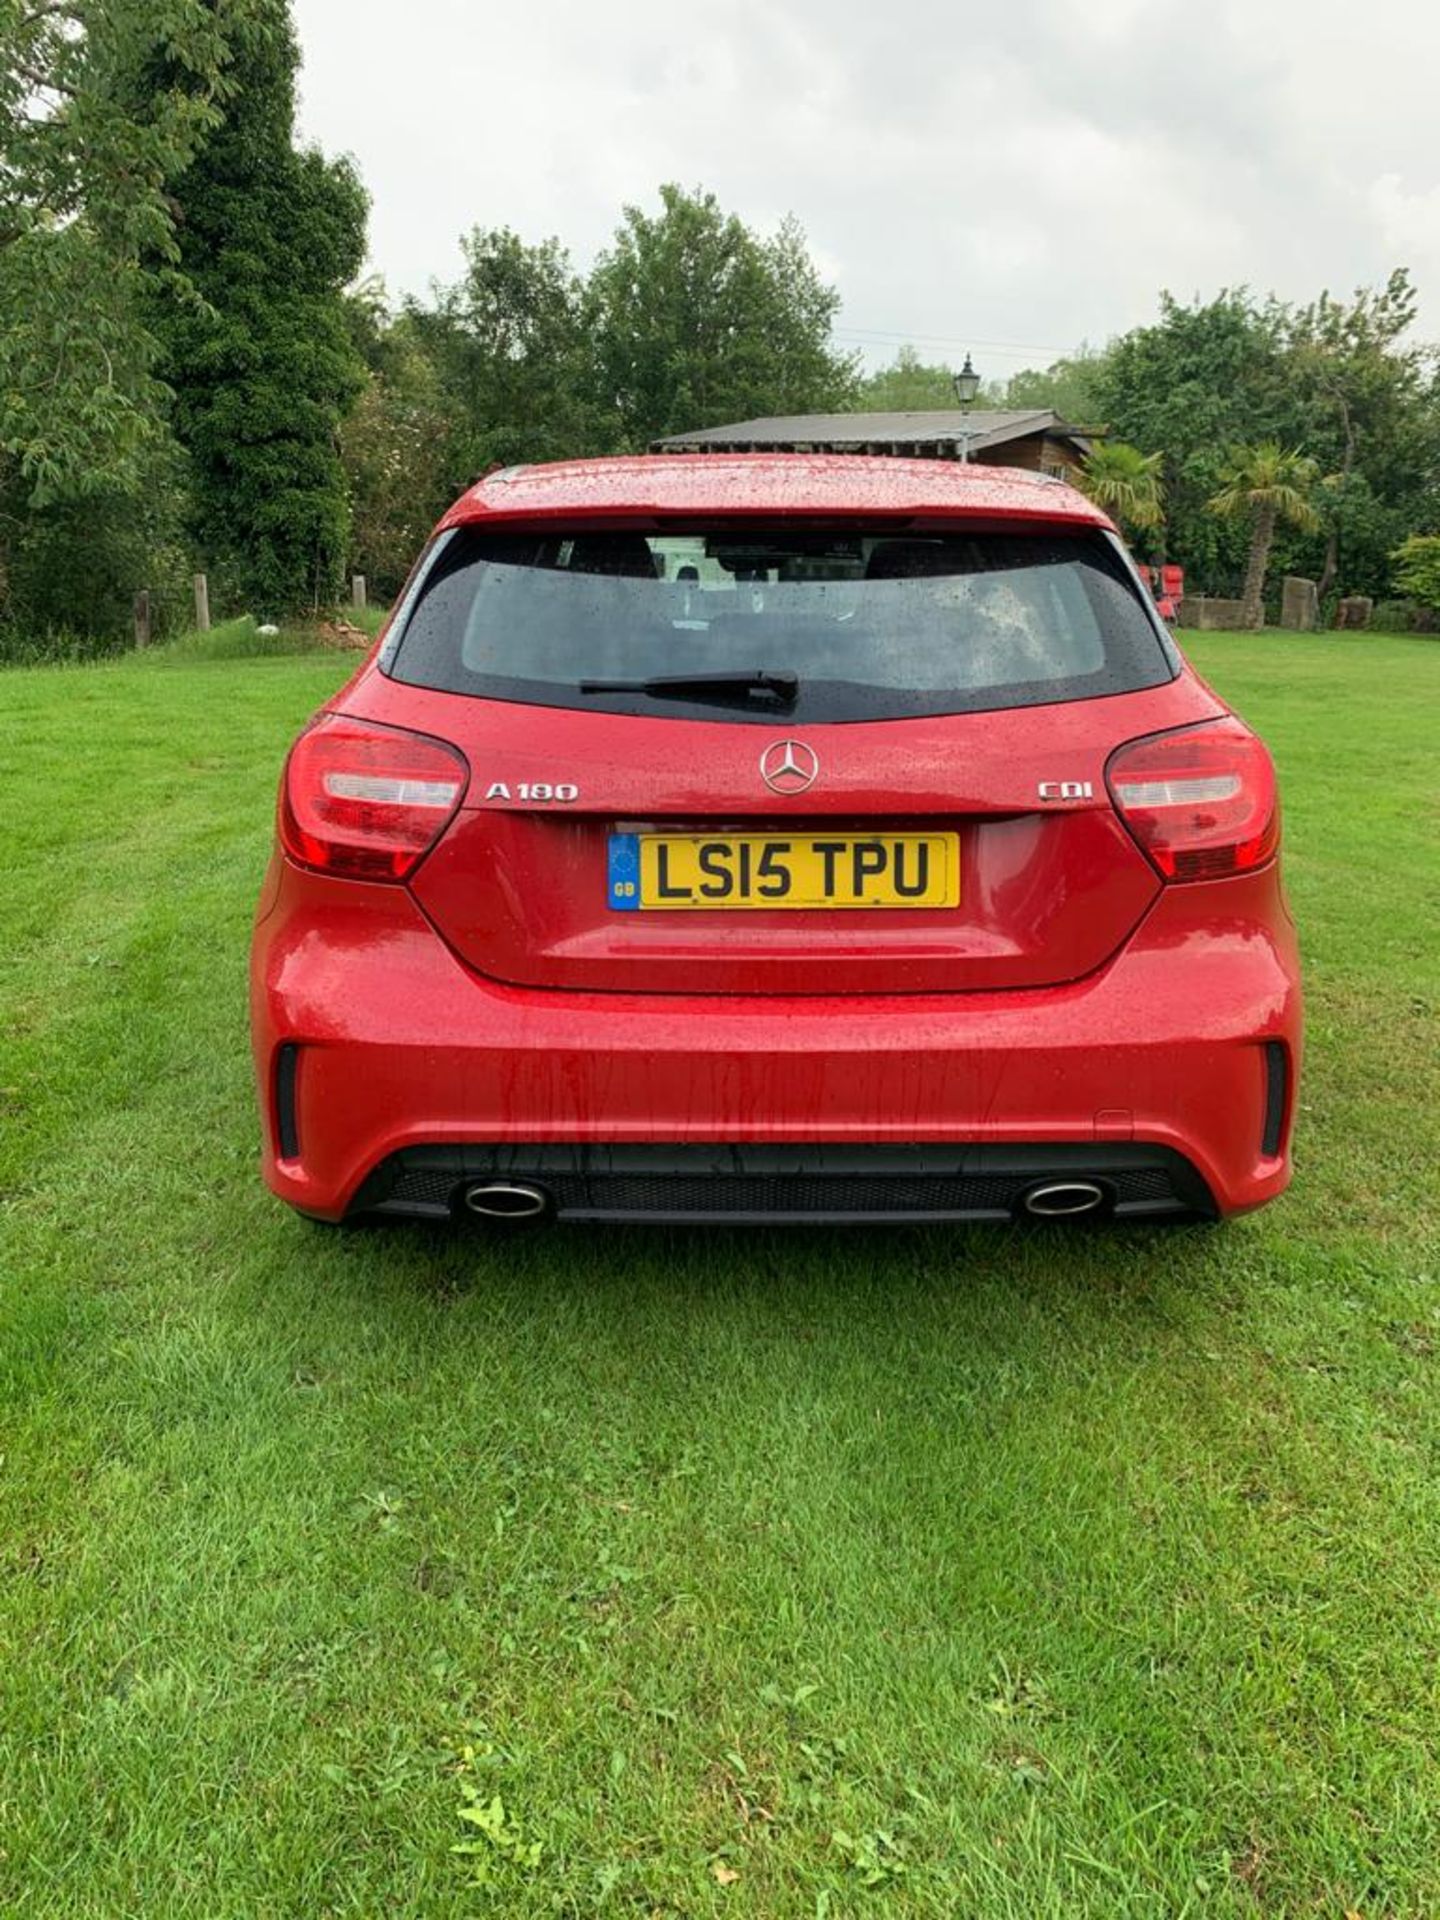 2015/15 REG MERCEDES-BENZ A180 BLUE EFFICIENCY AMG SPORT CDI 1.5 DIESEL, SHOWING 0 FORMER KEEPERS - Image 8 of 16